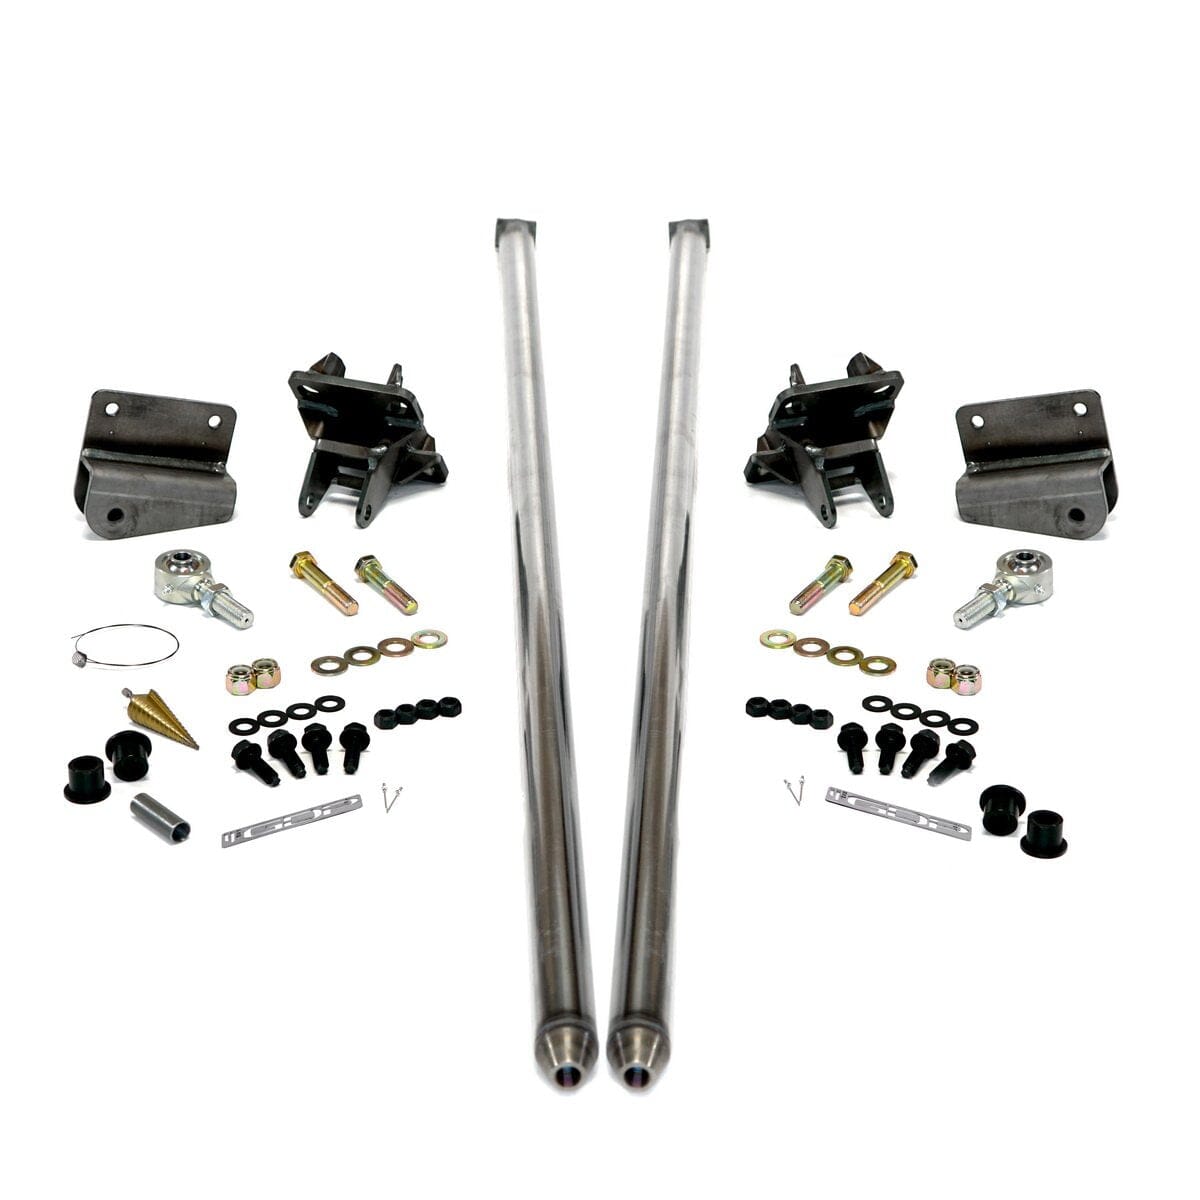 70" Bolt-on Traction Bars 4" Axle Diameter (2011-2019 6.6L Duramax) Traction Bars GDP Raw 